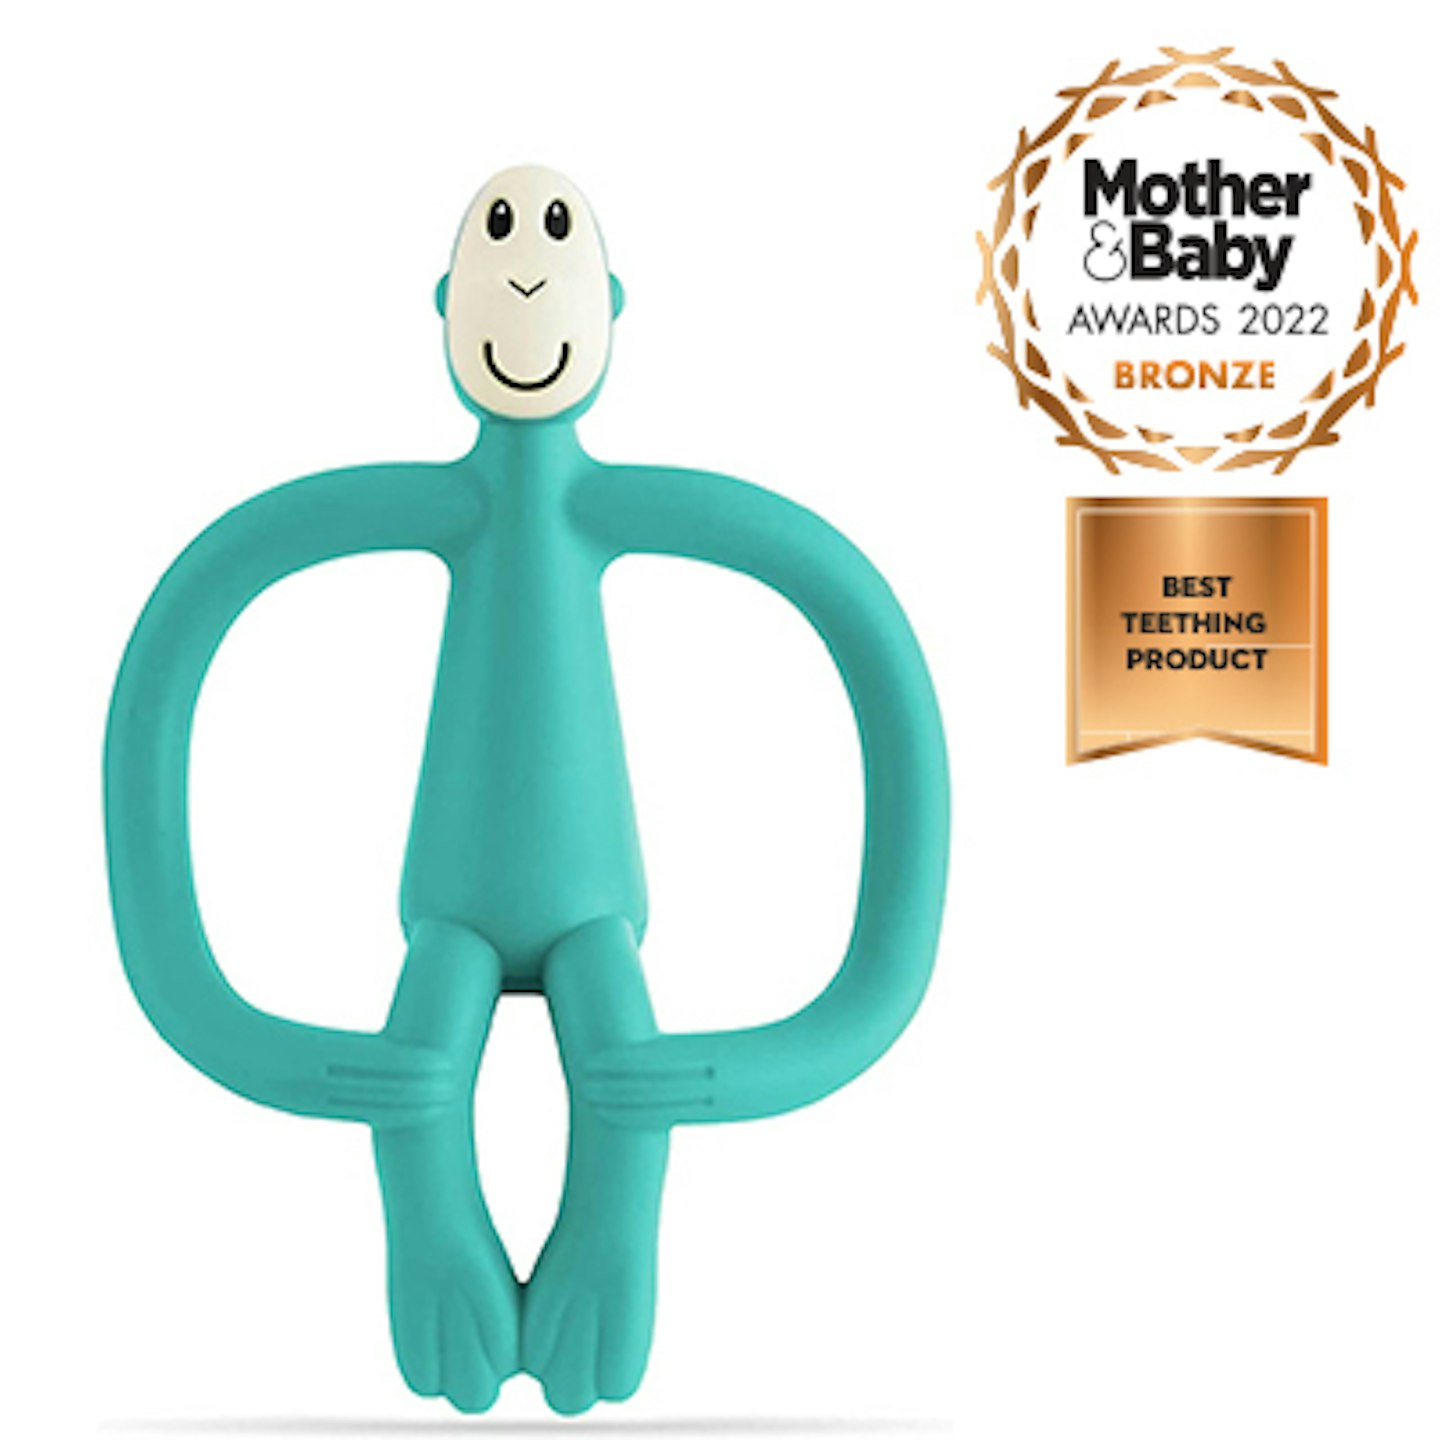 Matchstick Monkey Teething Toy Review